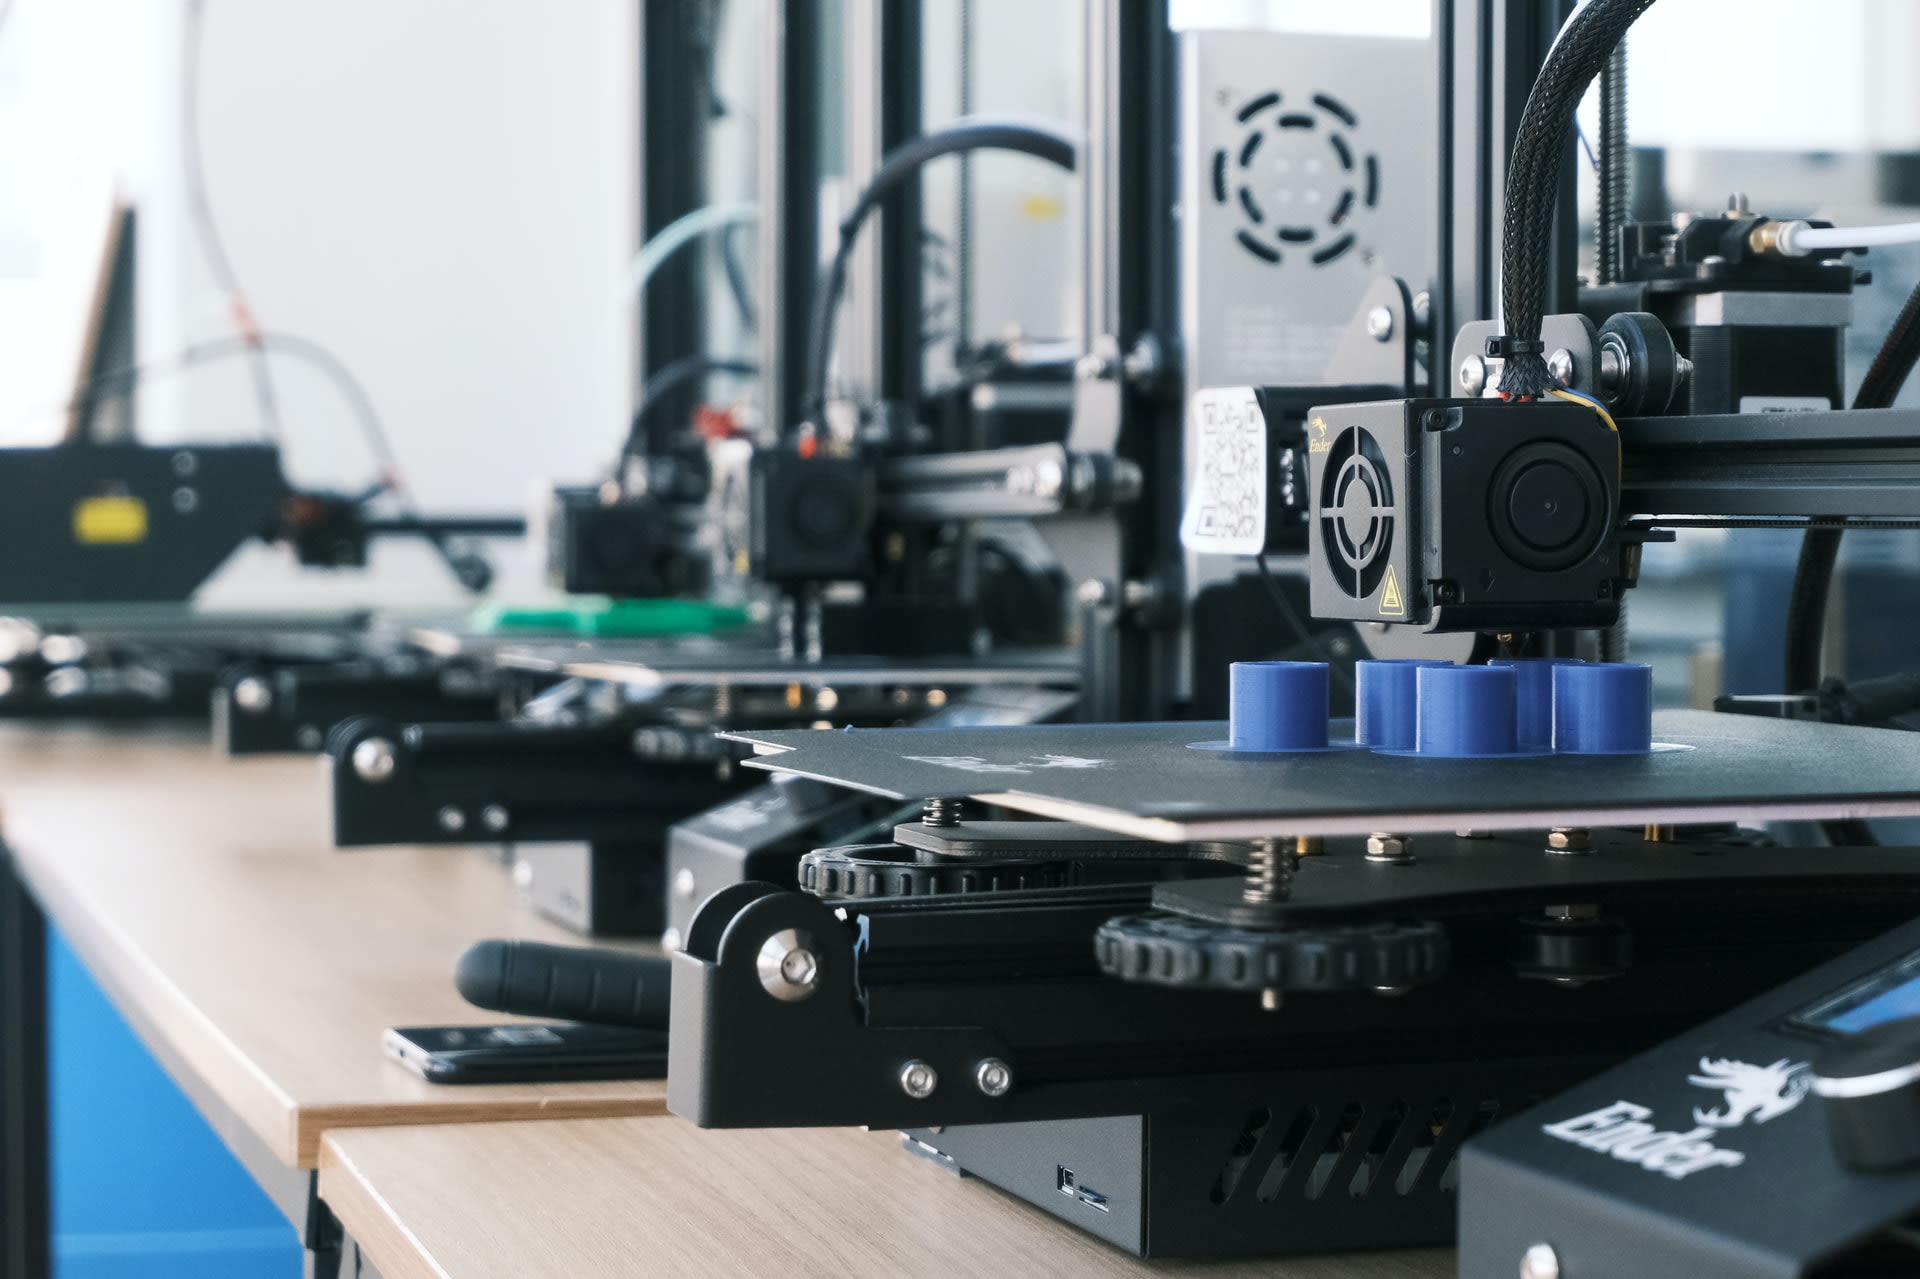 What happened to 3D printing stocks?